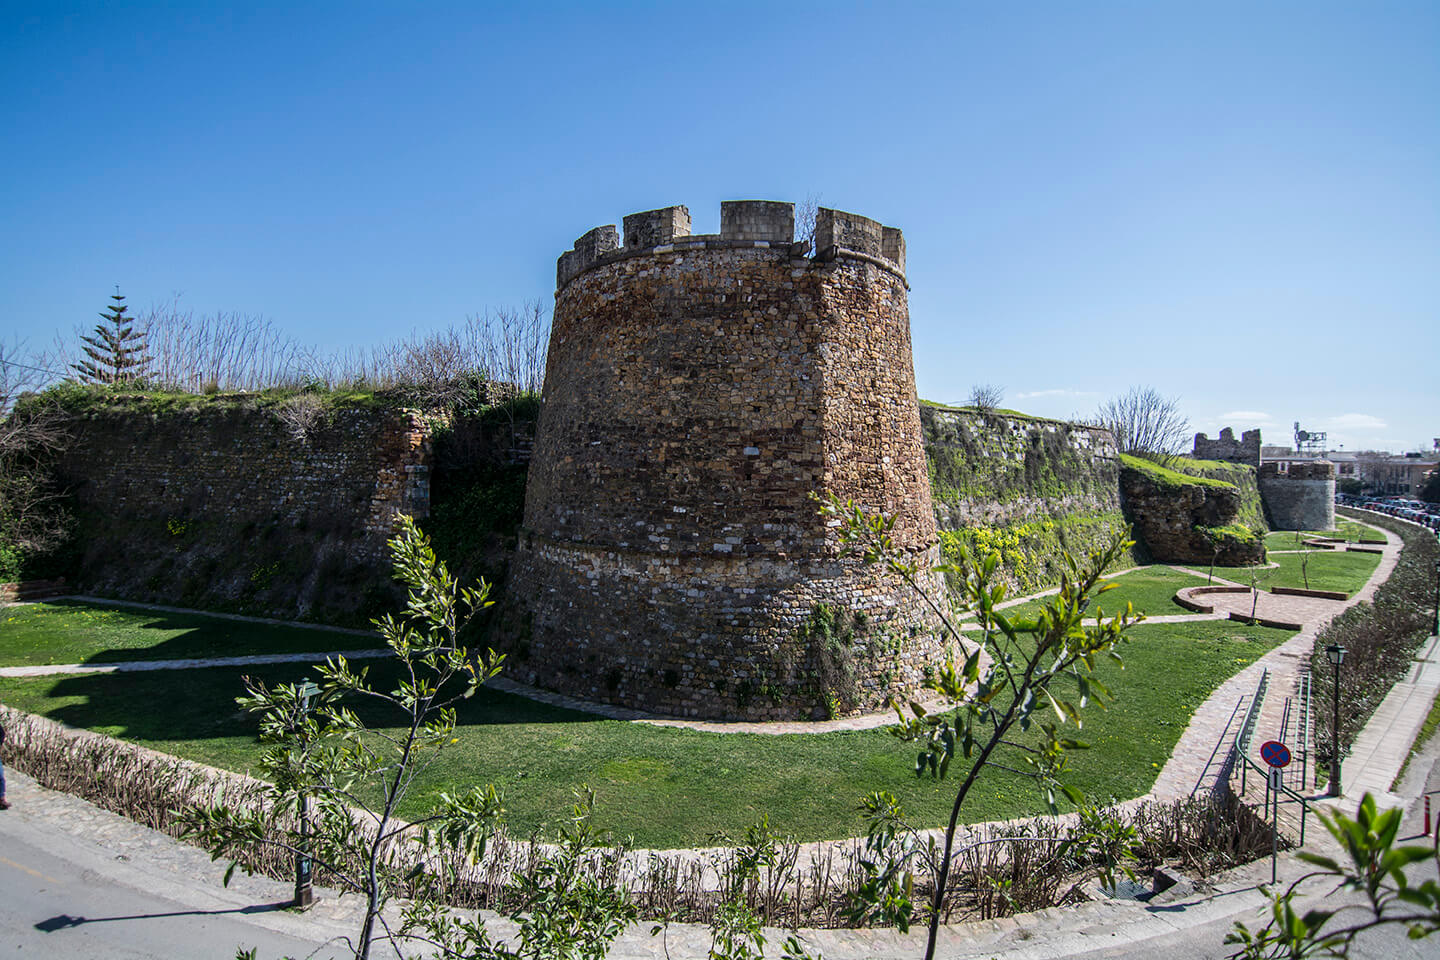 The castle of the Old City of Chios